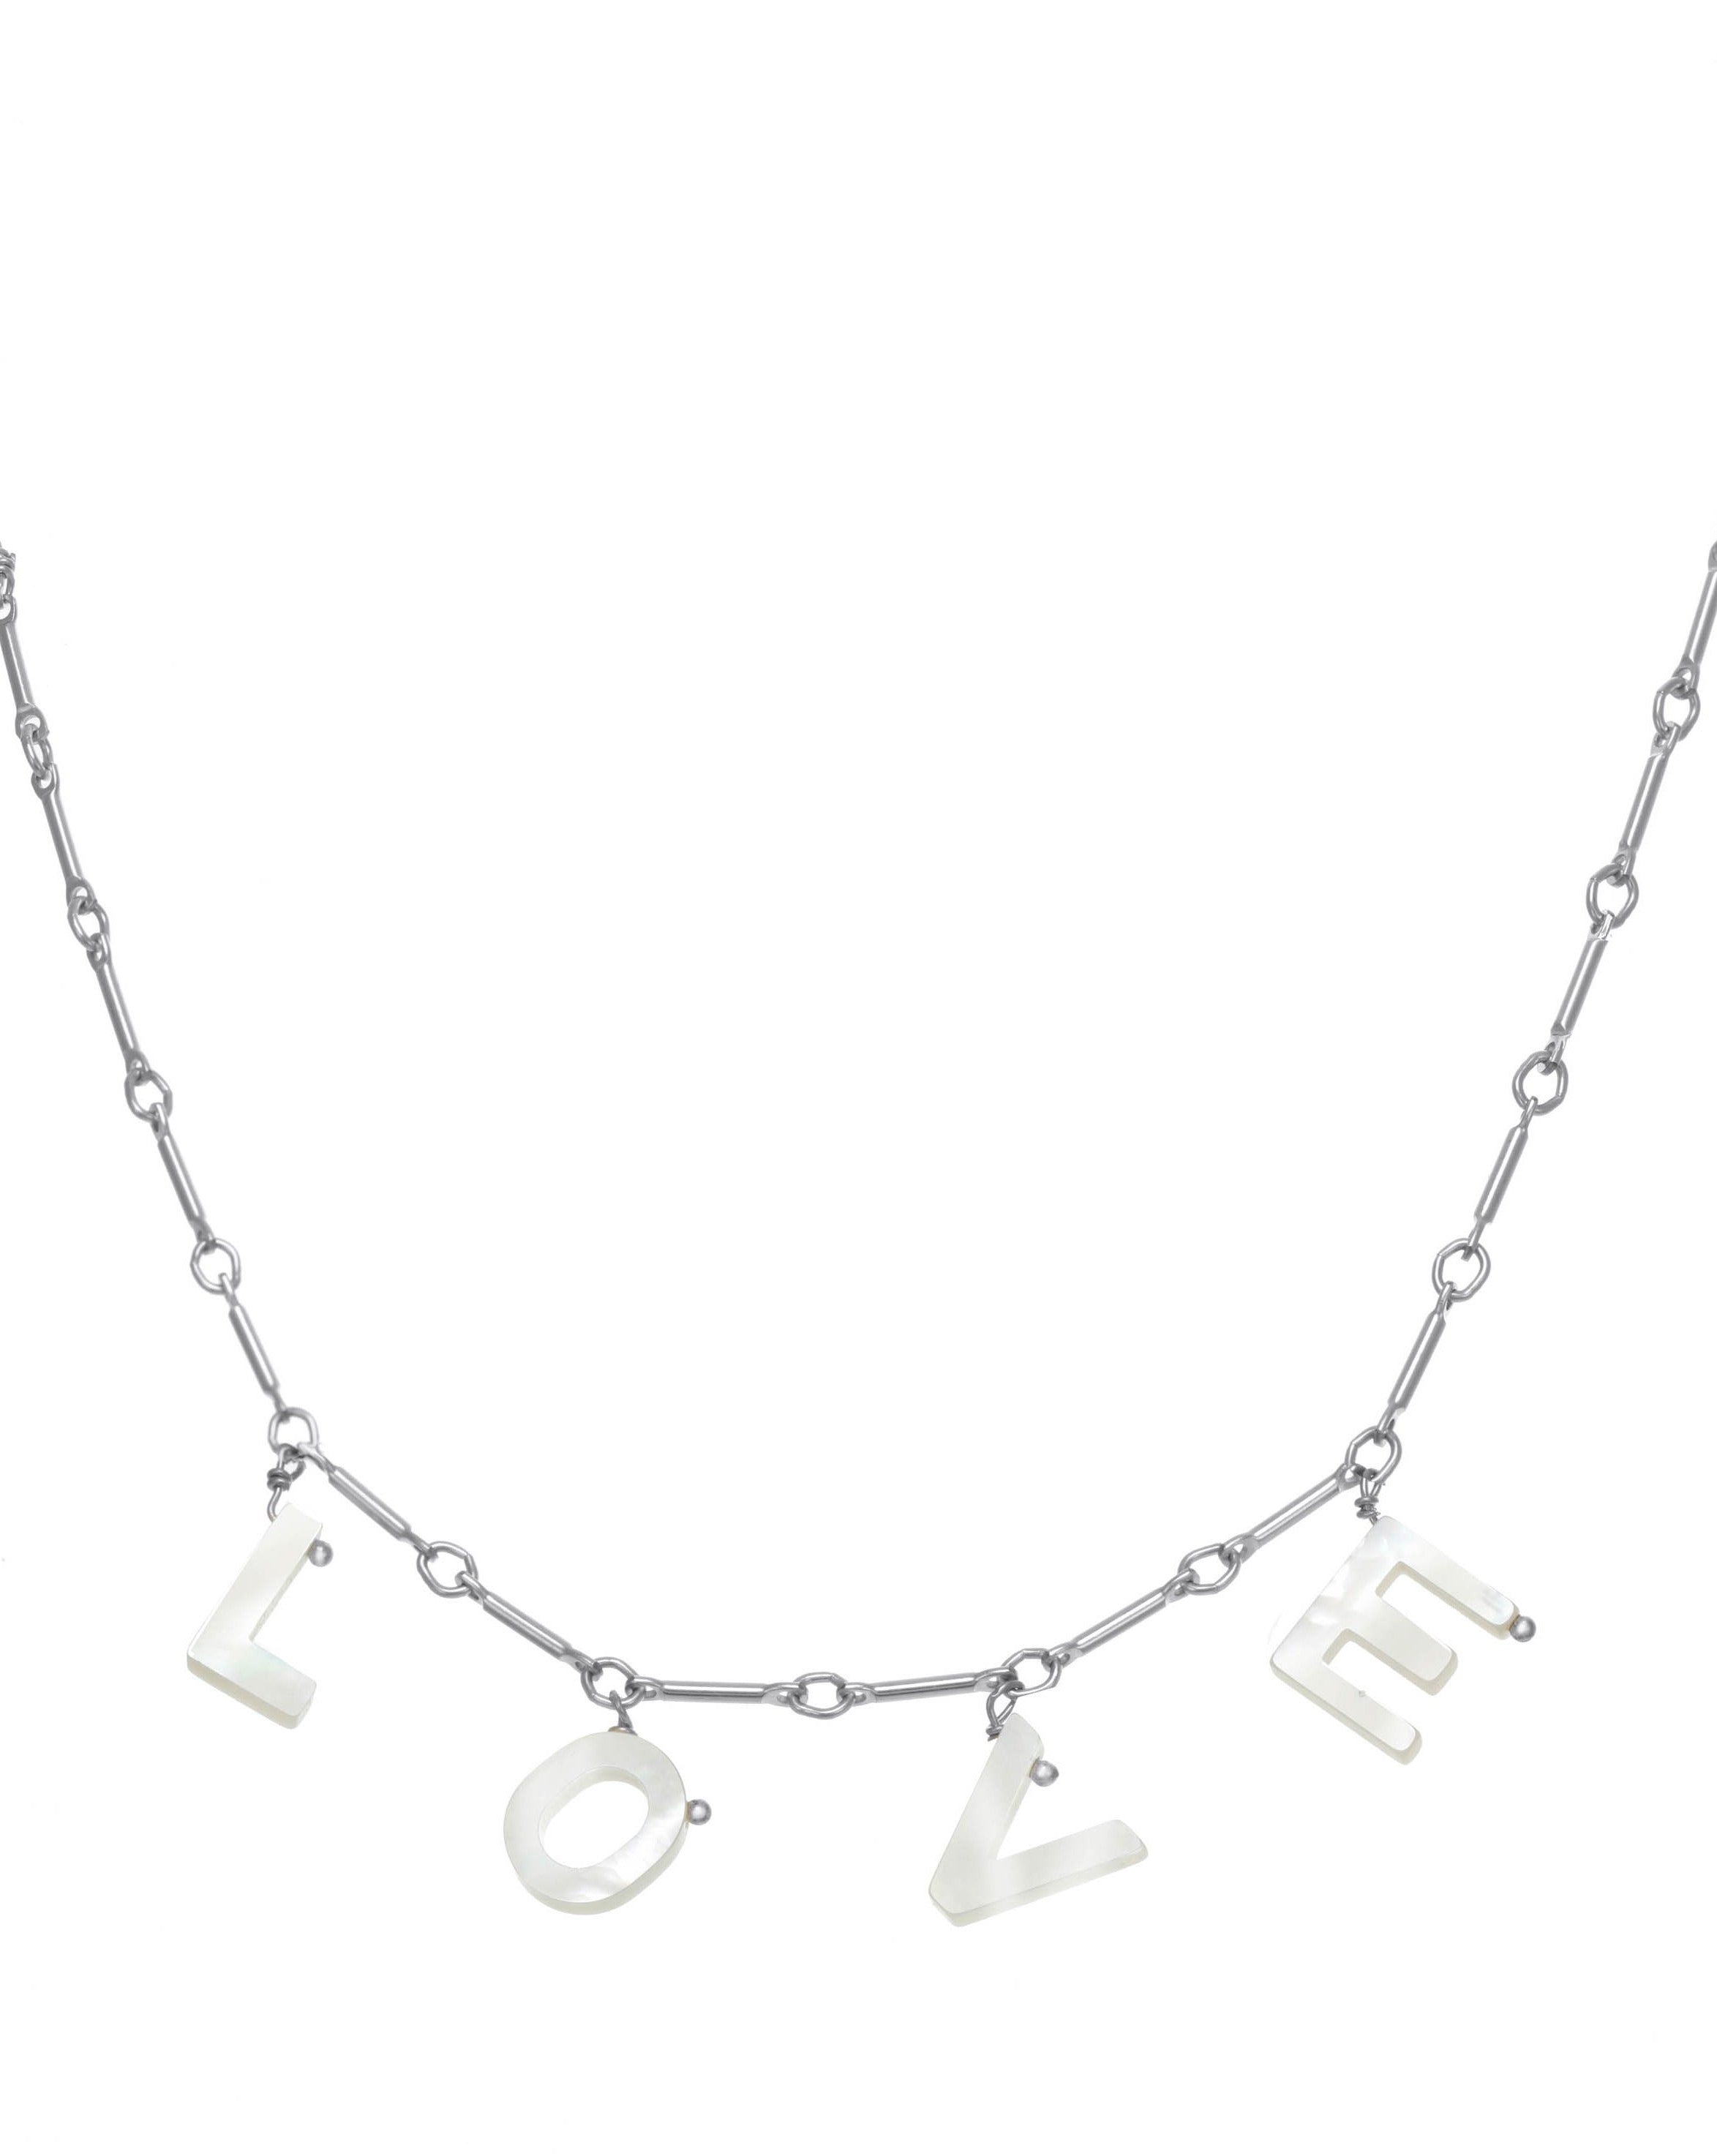 Mama Necklace by KOZAKH. A 16 to 18 inch adjustable length necklace with linked bar chain on bottom half and flat link chain on top half, crafted in Sterling Silver, featuring a customizable word made from hand carved Mother of Pearl letters.